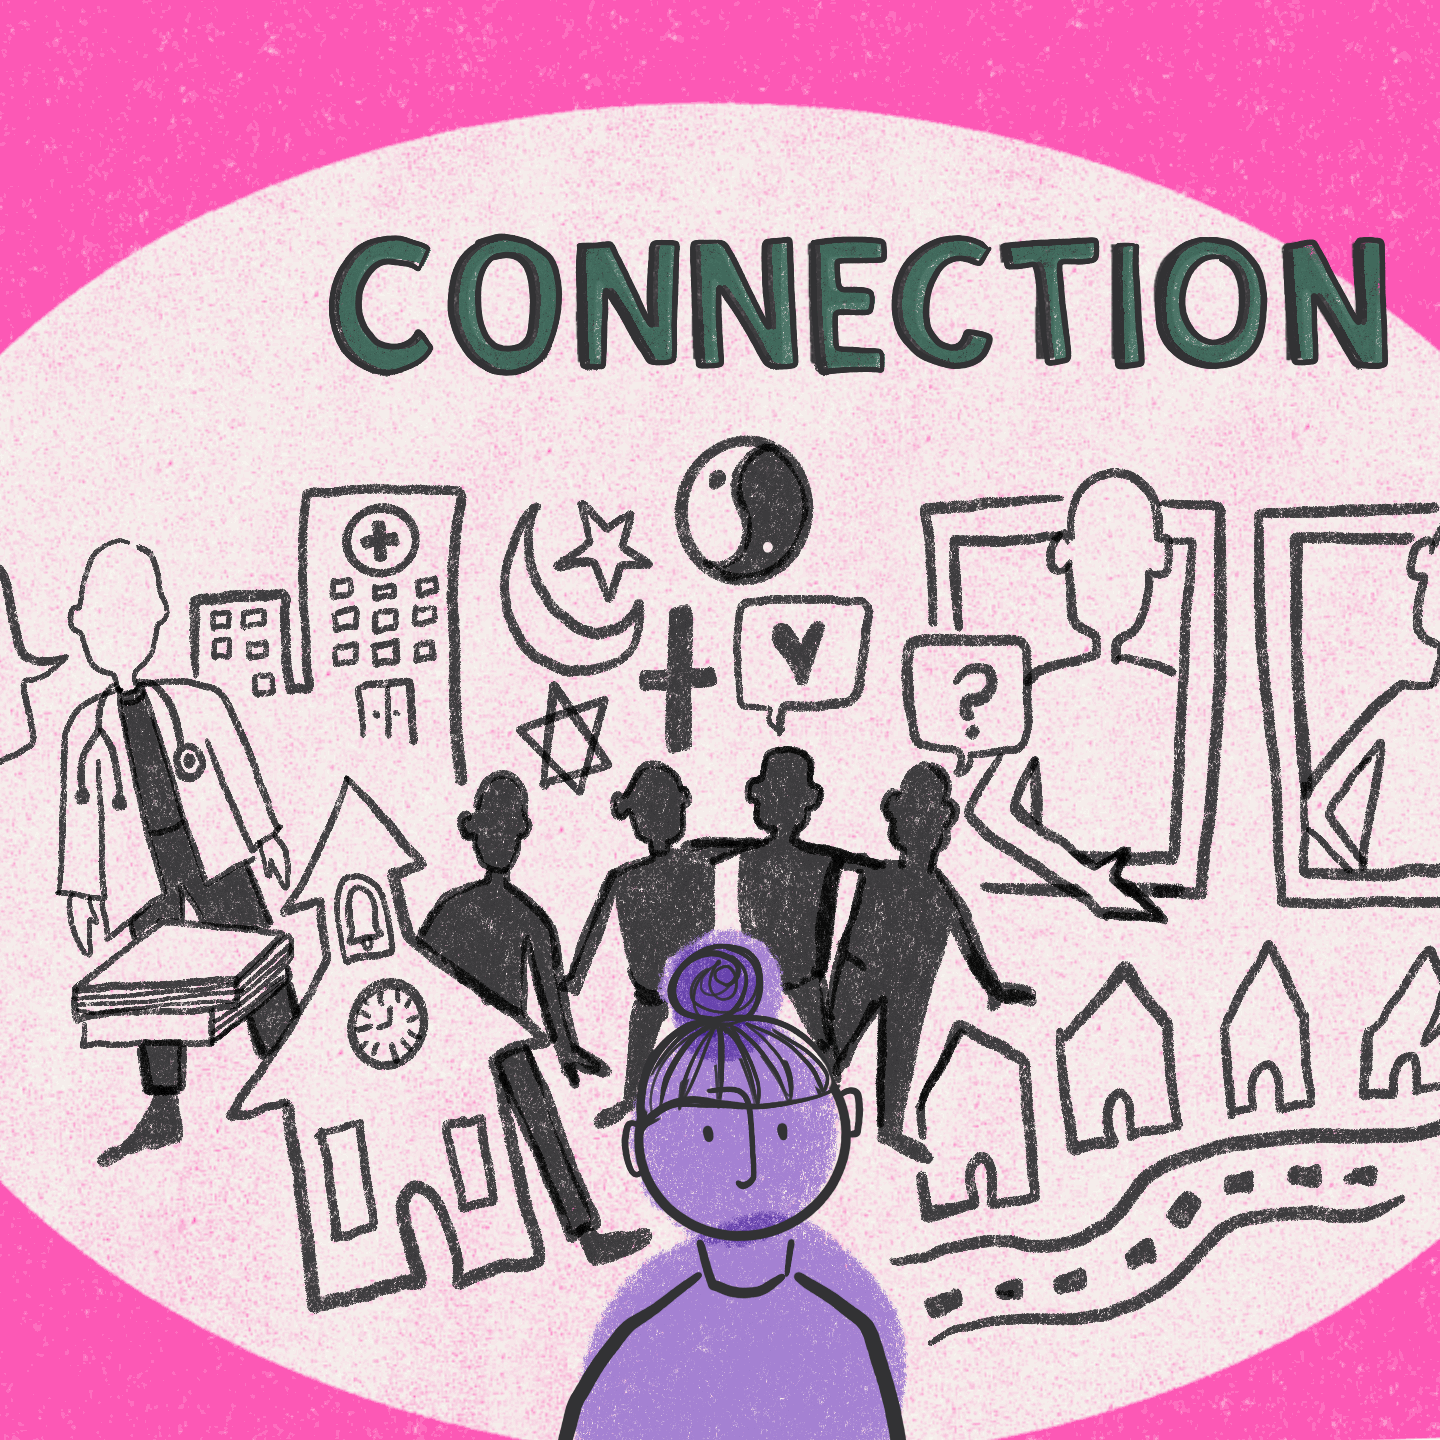 An animated image of a young person with community members behind them disappearing as a police badge grows bigger. The words "connection" becomes "disconnection" as the badge grows bigger.